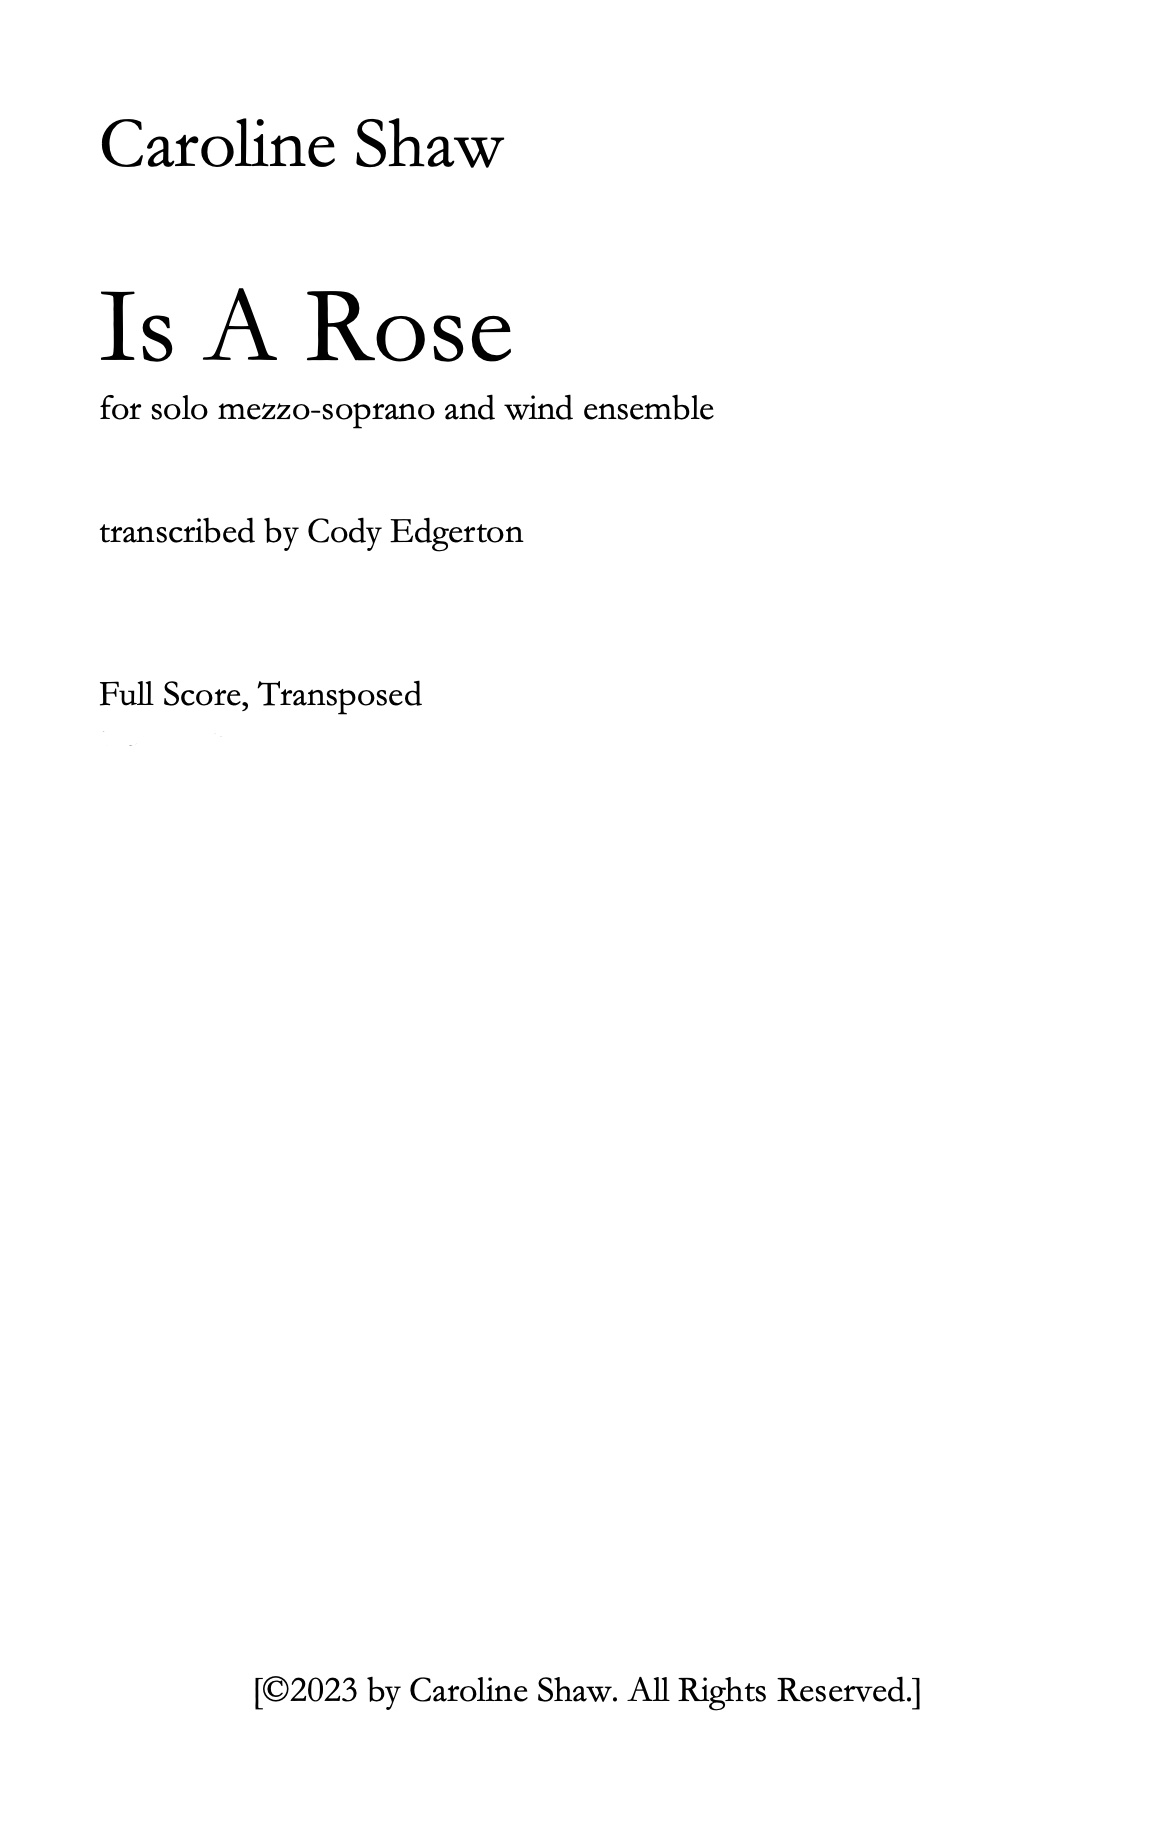 Is A Rose (Score Only) by Caroline Shaw, arr. Edgerton